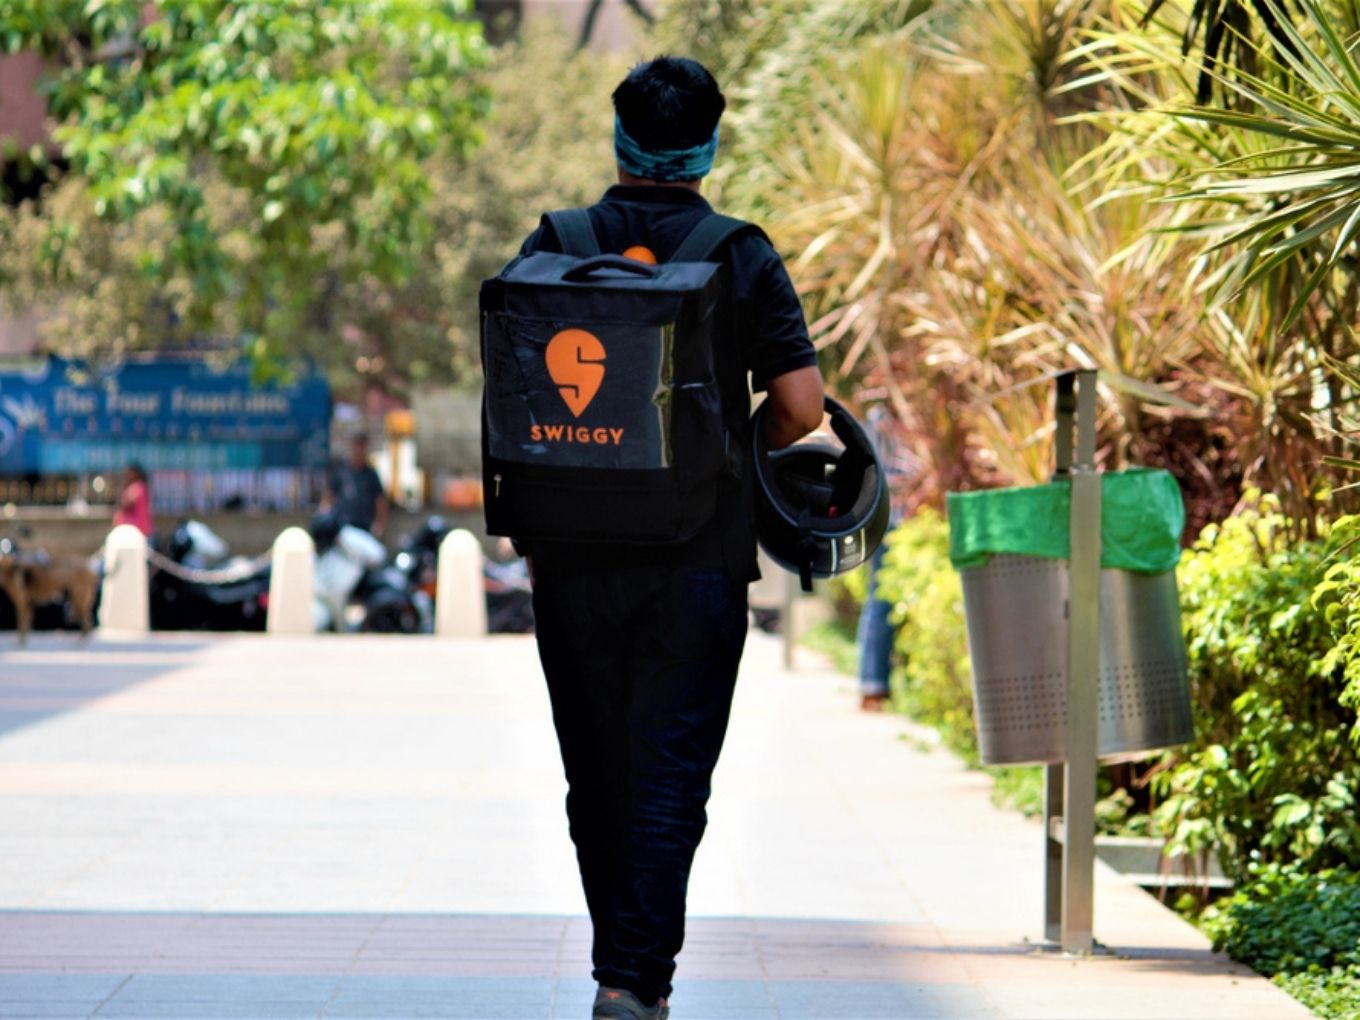 Swiggy Eyes $1 Bn War Chest To Fend Off Zomato Amid Food Delivery Revival